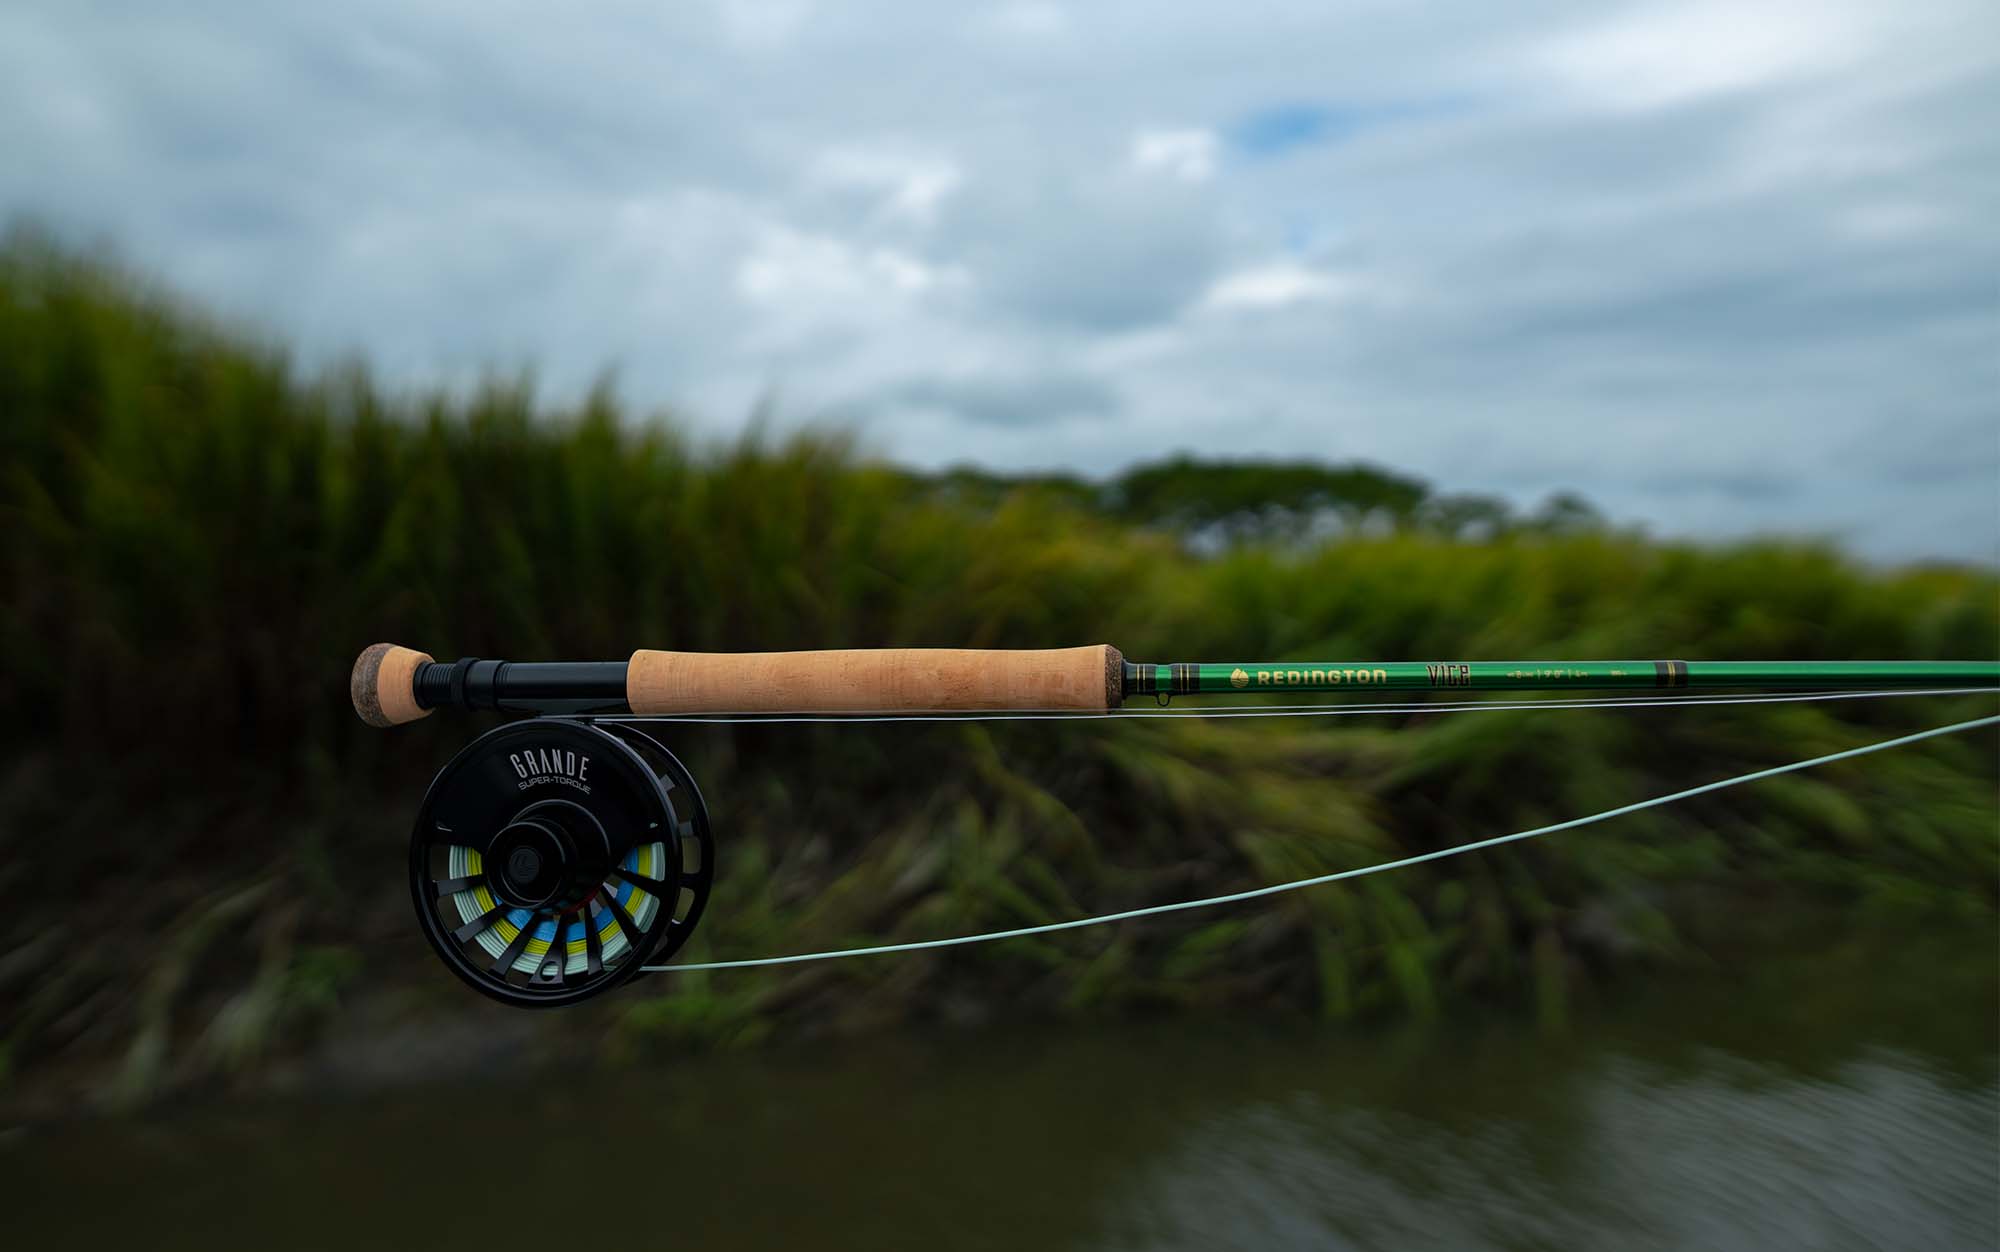  Fly Fishing Rod & Reel Combos - SAGE / Fly Fishing Rod & Reel  Combos / Fly Fishi: Sports & Outdoors